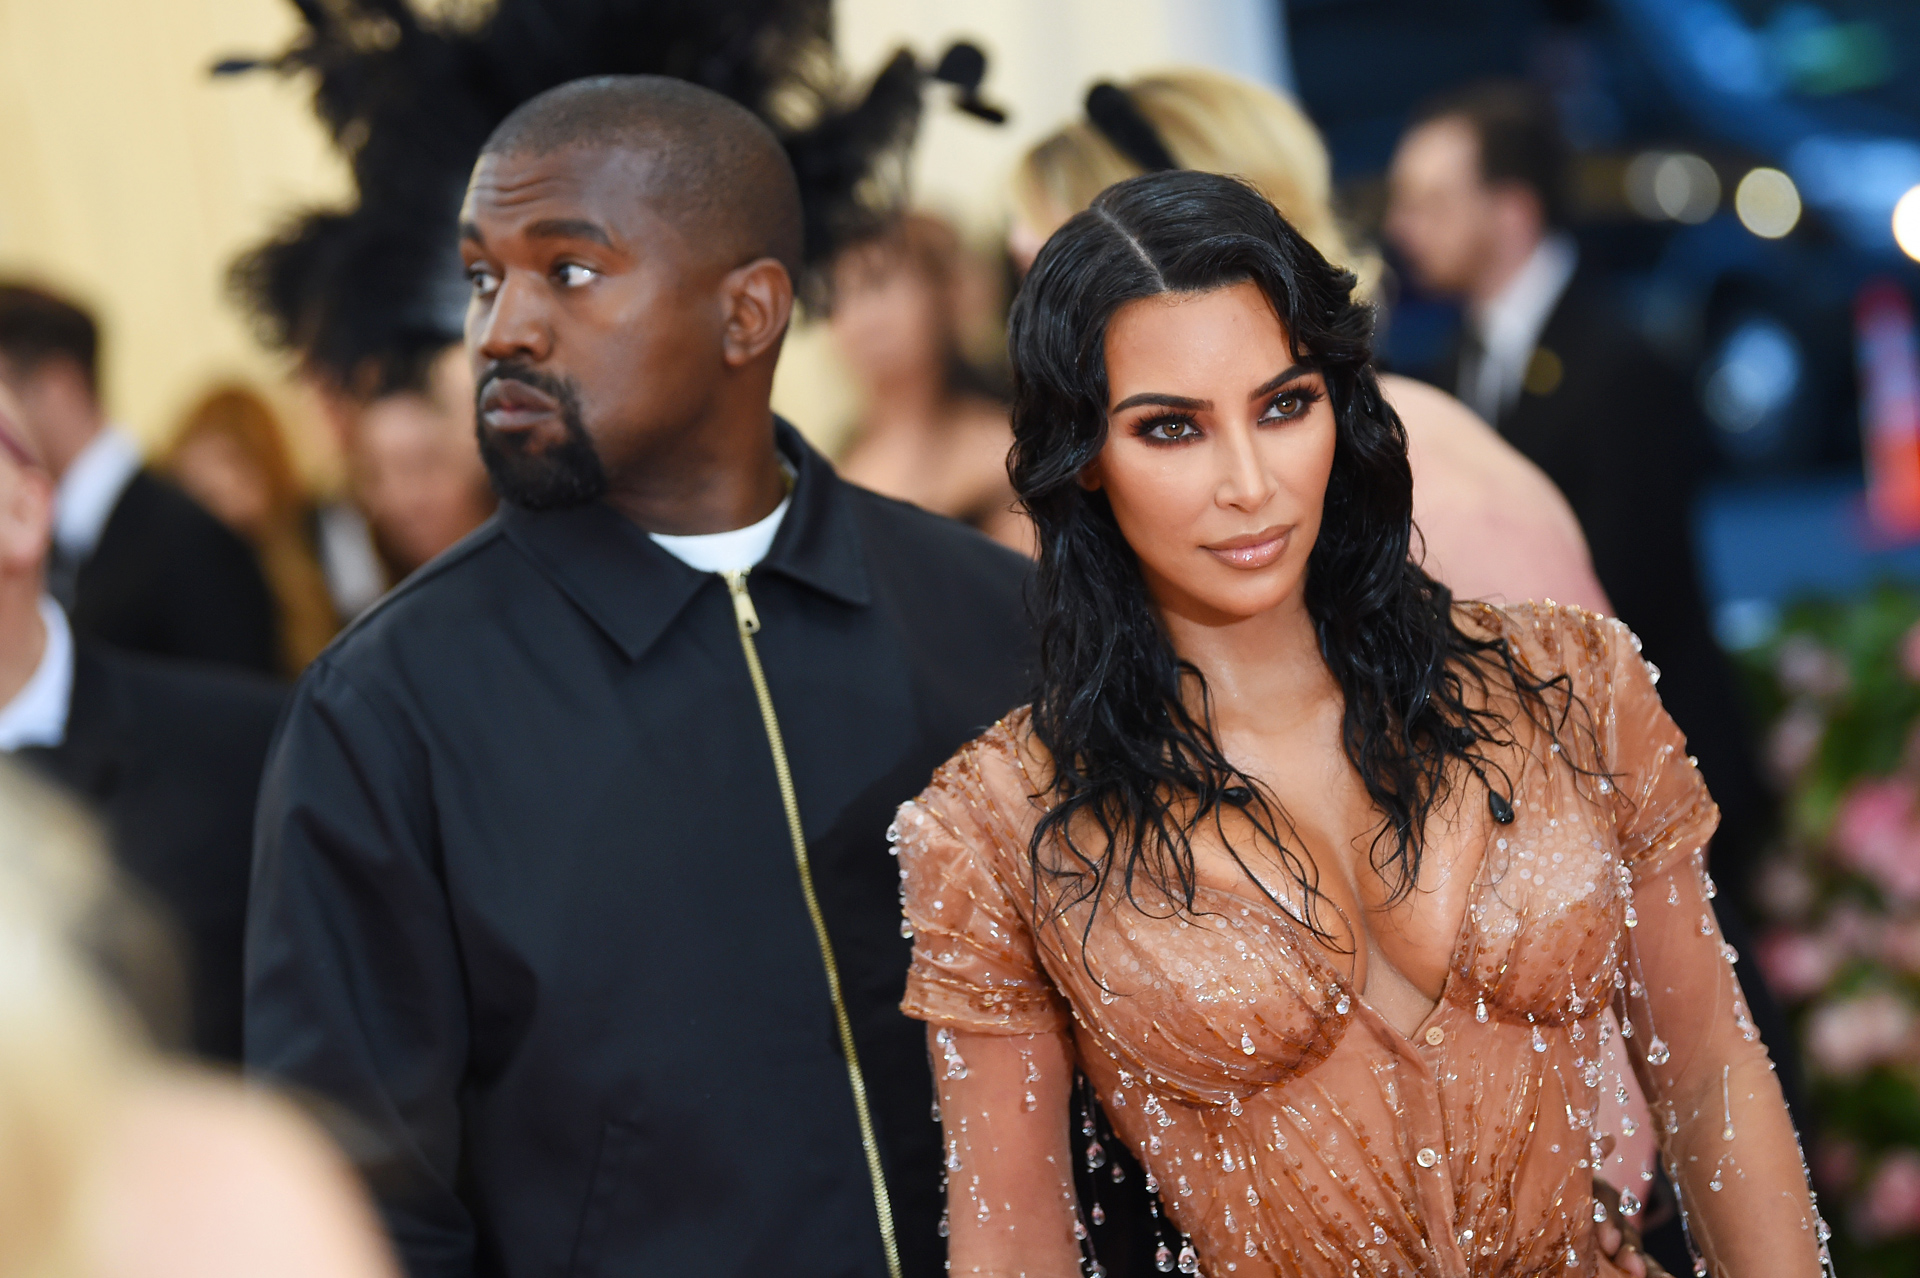 From TMZ to Divorce: The Decline of Kanye West and Kim Kardashian’s Marriage